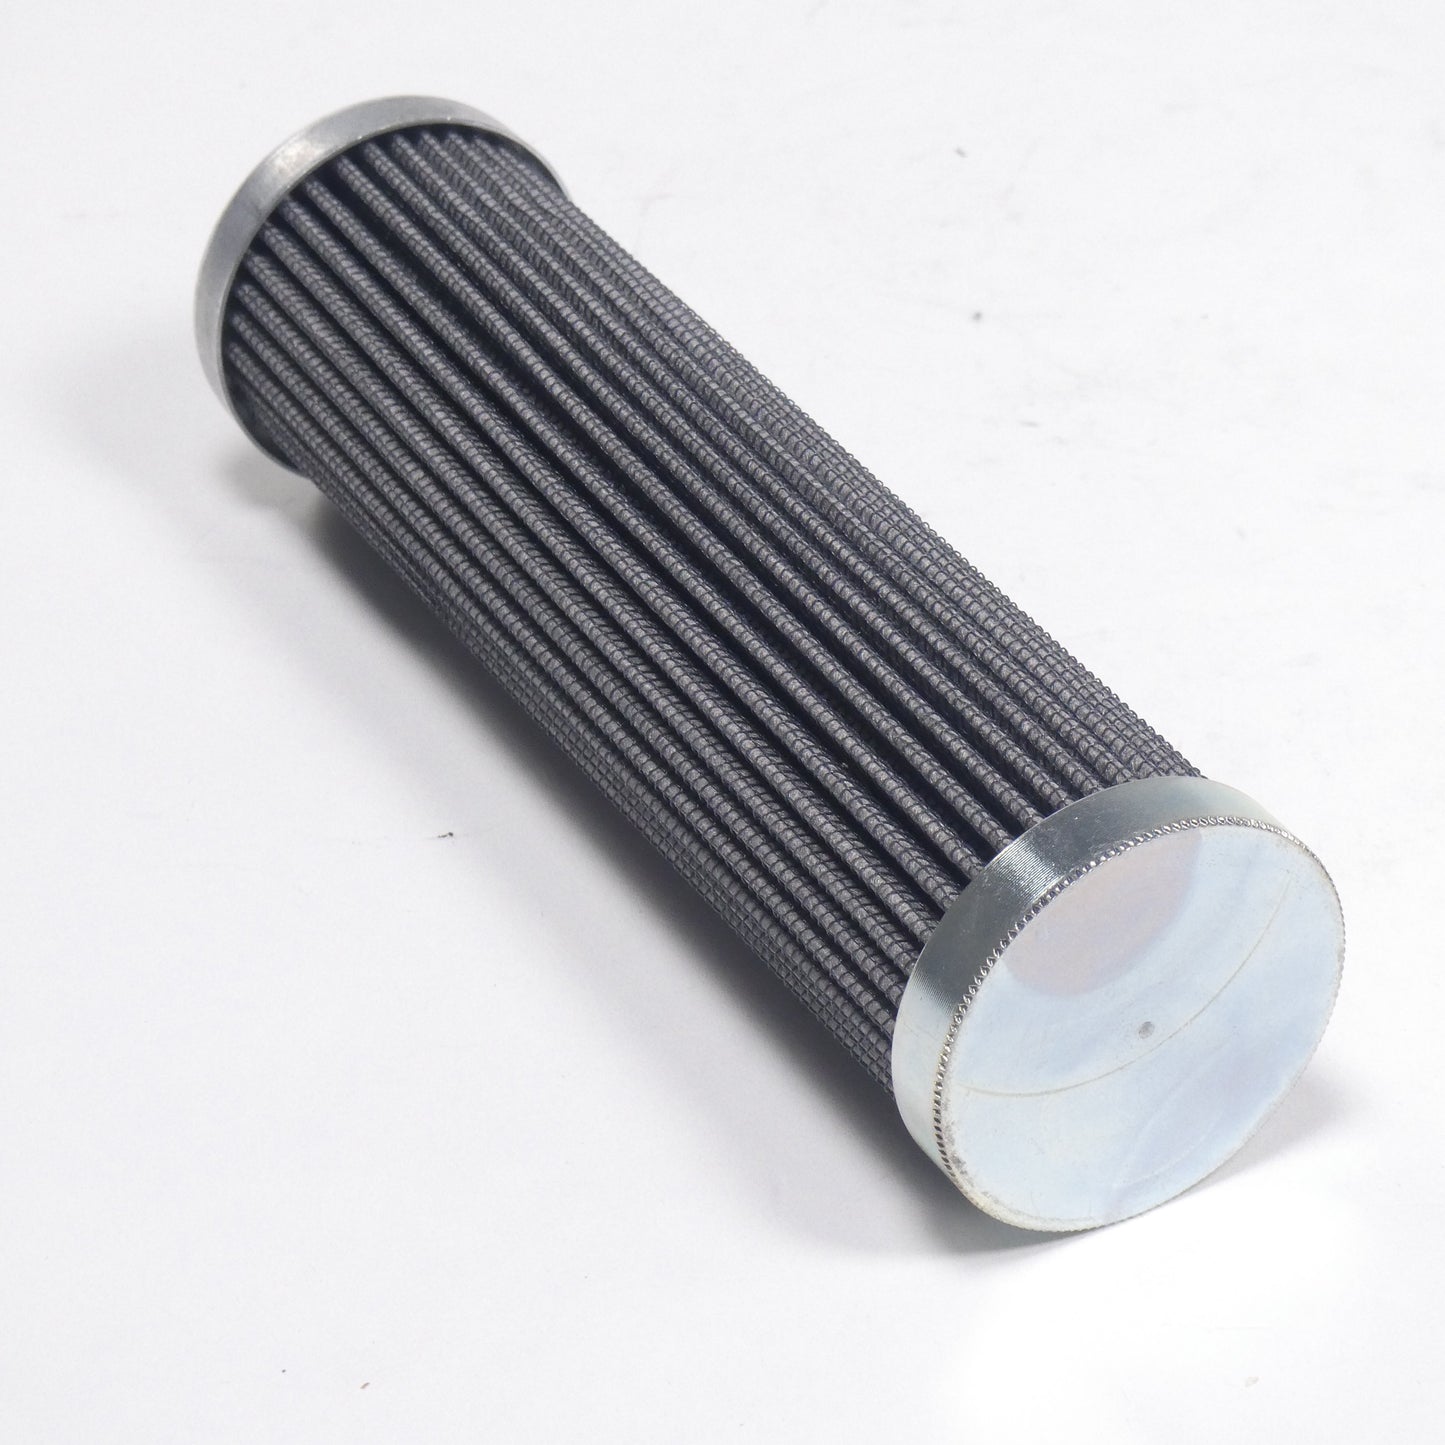 Hydrafil Replacement Filter Element for Unitech AA110A003V